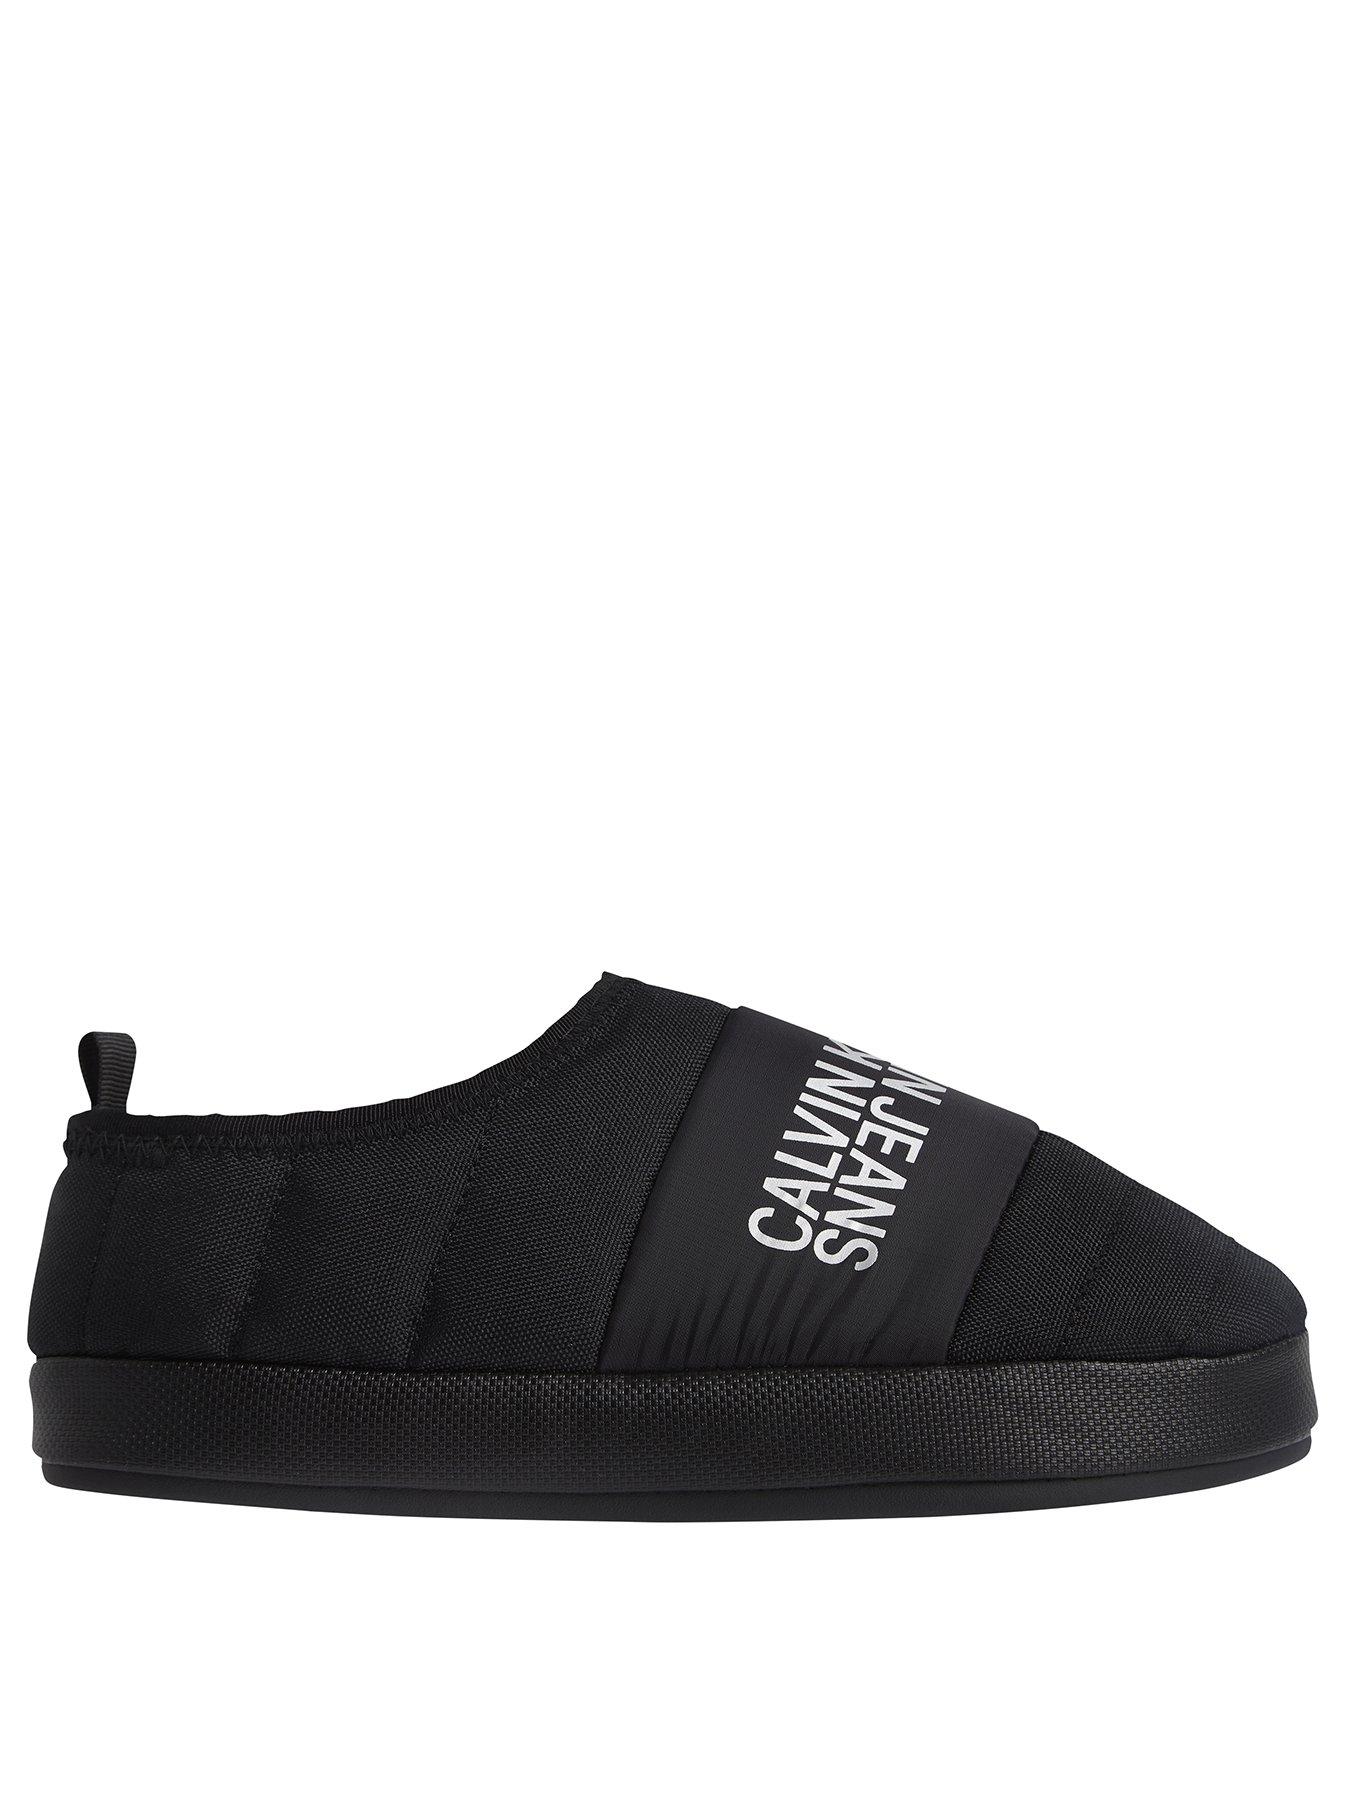  Home Shoe Slipper with Warm Lining - Black